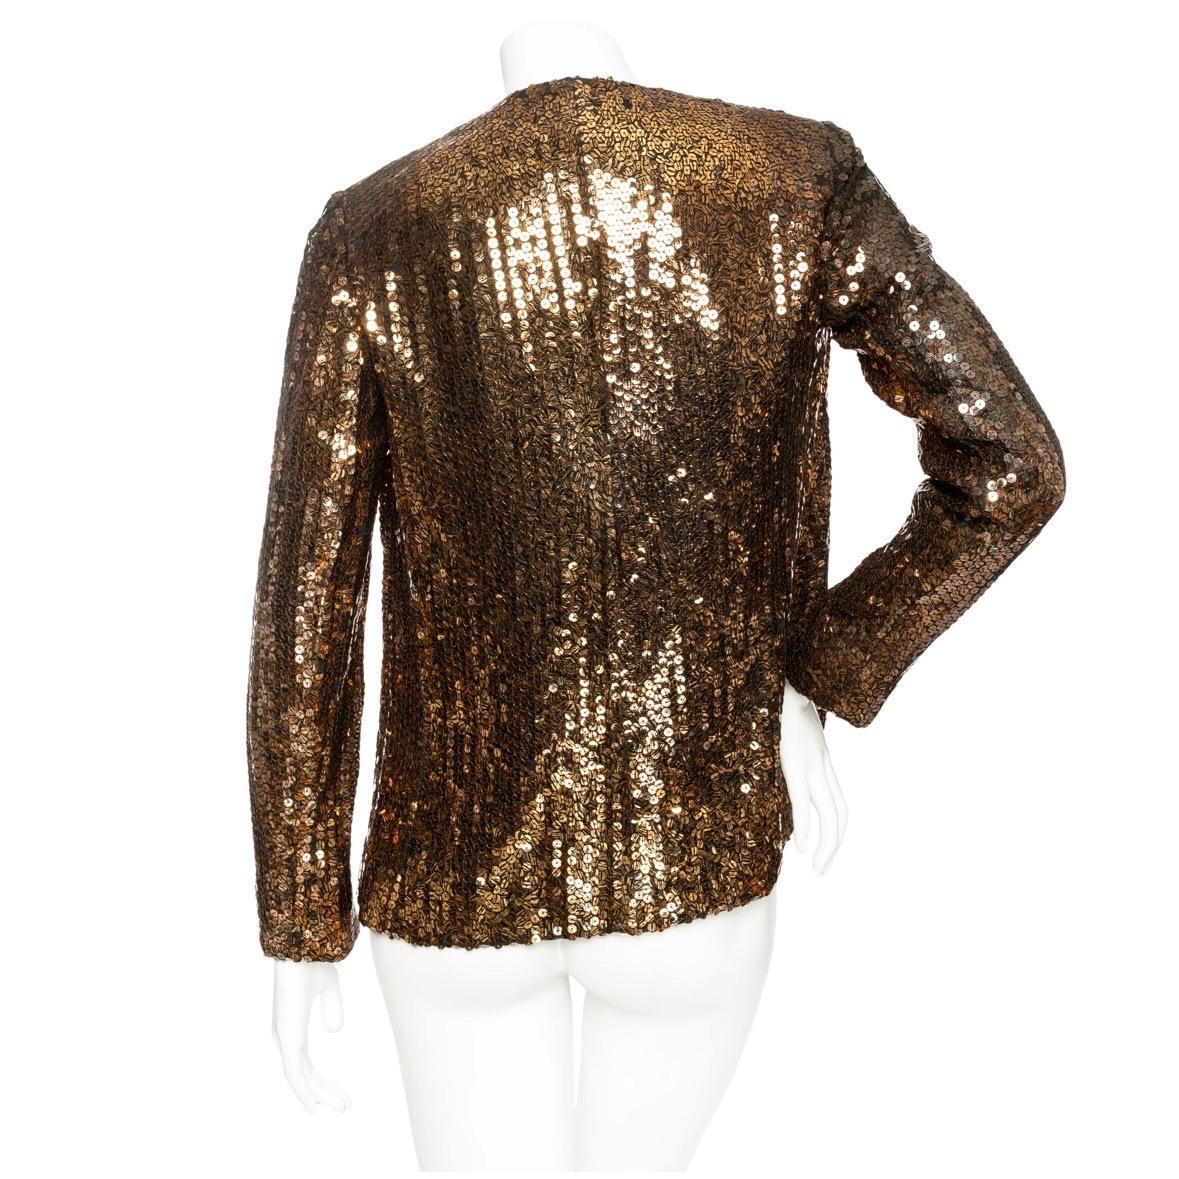 Christian Dior 1960s Copper and Black Tiger Print Sequin Jacket

Vintage; 1960s
Copper/Black
Tiger stripe print sequins
Collarless
Round neck
Open front
Made in France
Good pre-owned vintage condition; some loose threads and armhole needs repair